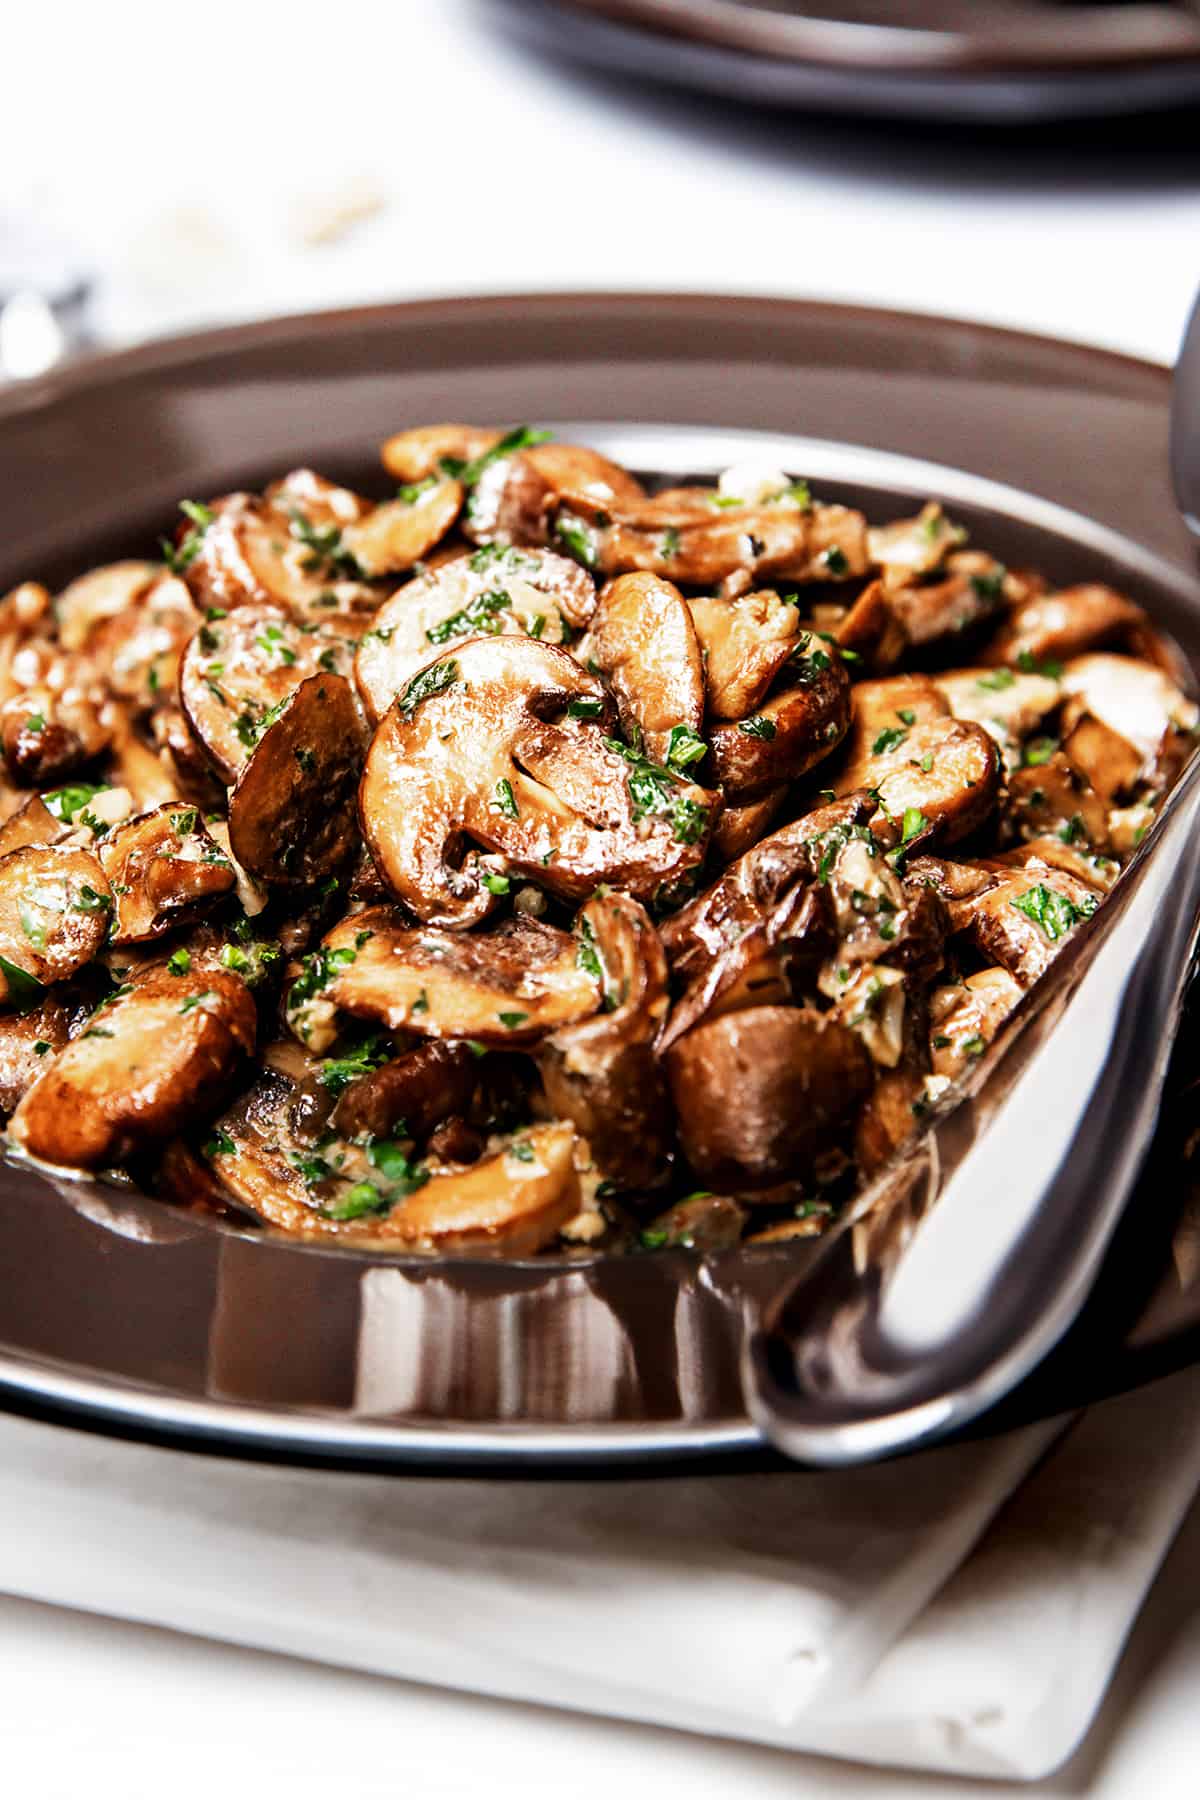 The Only Sautéed Mushrooms Recipe You'll Need - Erren's Kitchen